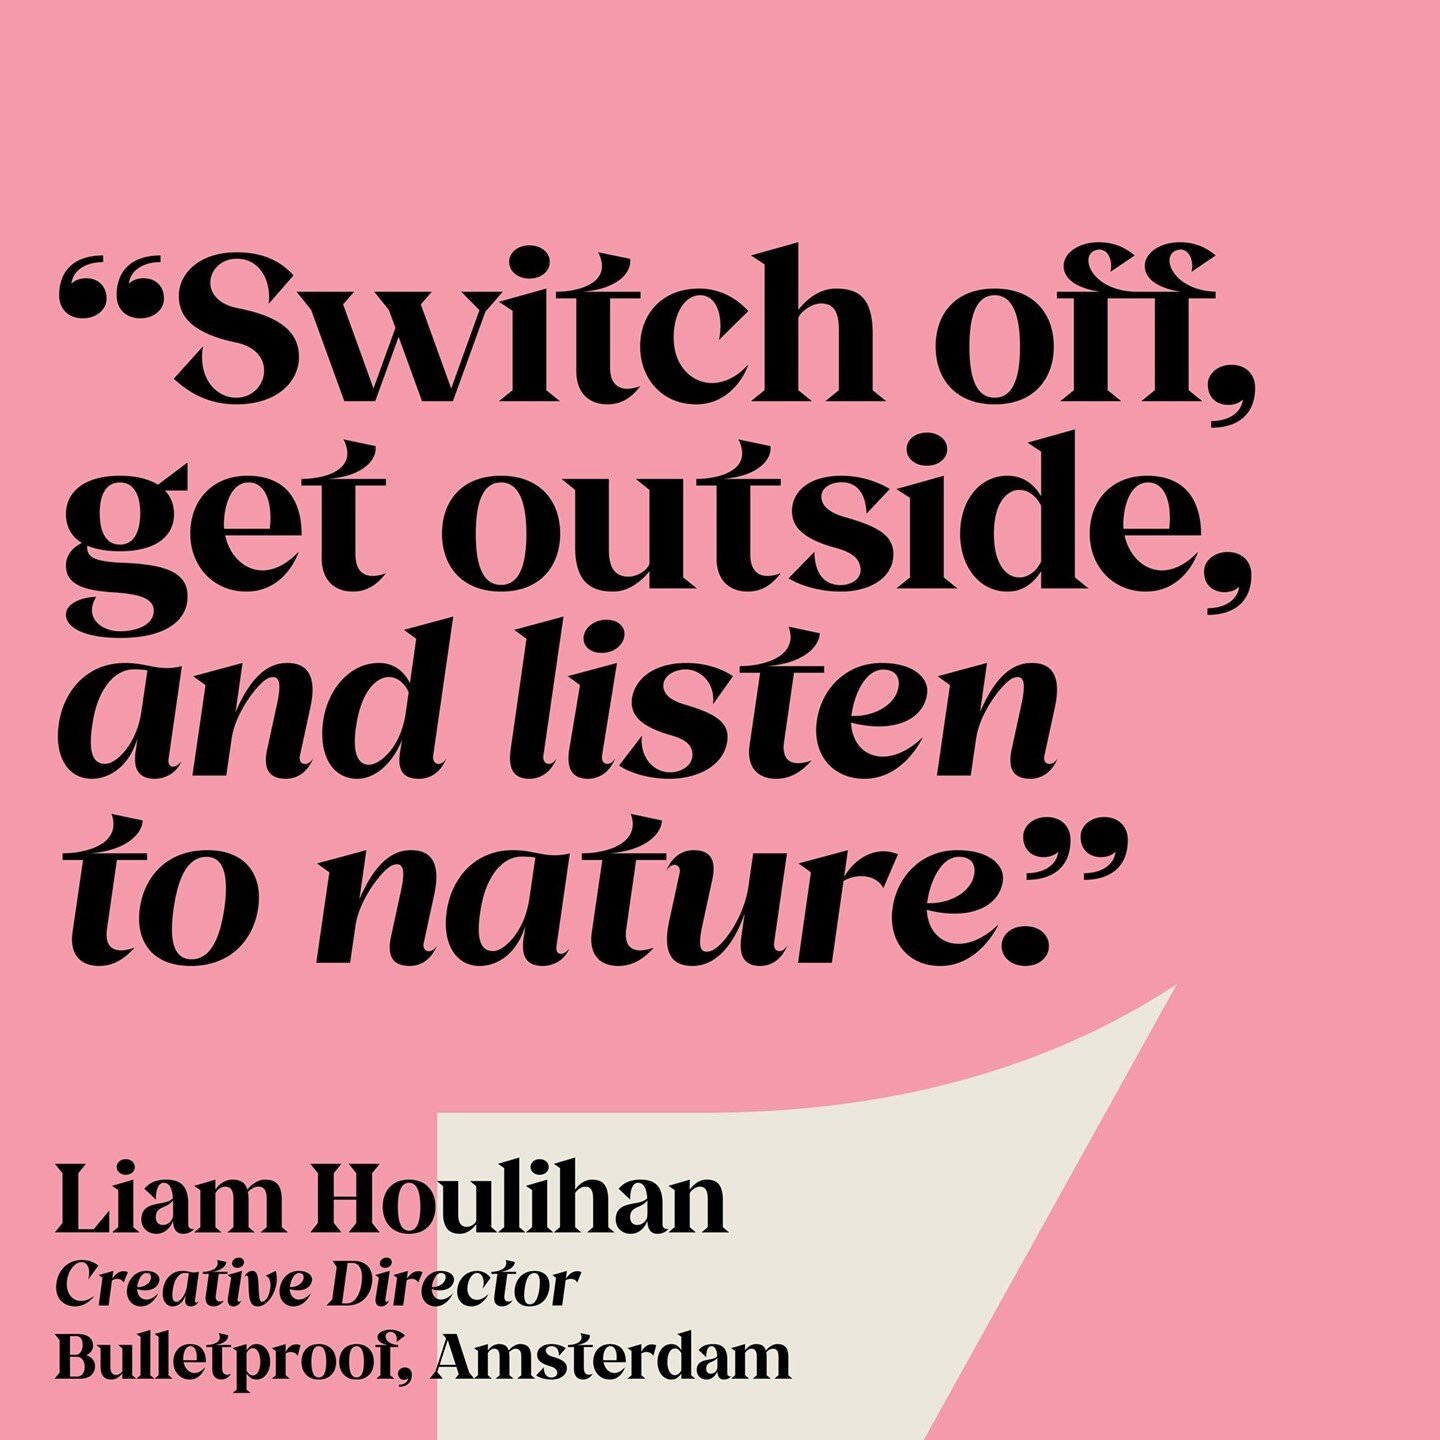 EP08 is out now. ⁠
WARNING: This podcast will affect your mind (in a positive way).⁠
⁠
EP08 features Liam Houlihan, Creative Director @bulletproofintl, Amsterdam.⁠
⁠
In this episode, we discuss how to have a healthy perspective on anxiety and how to 